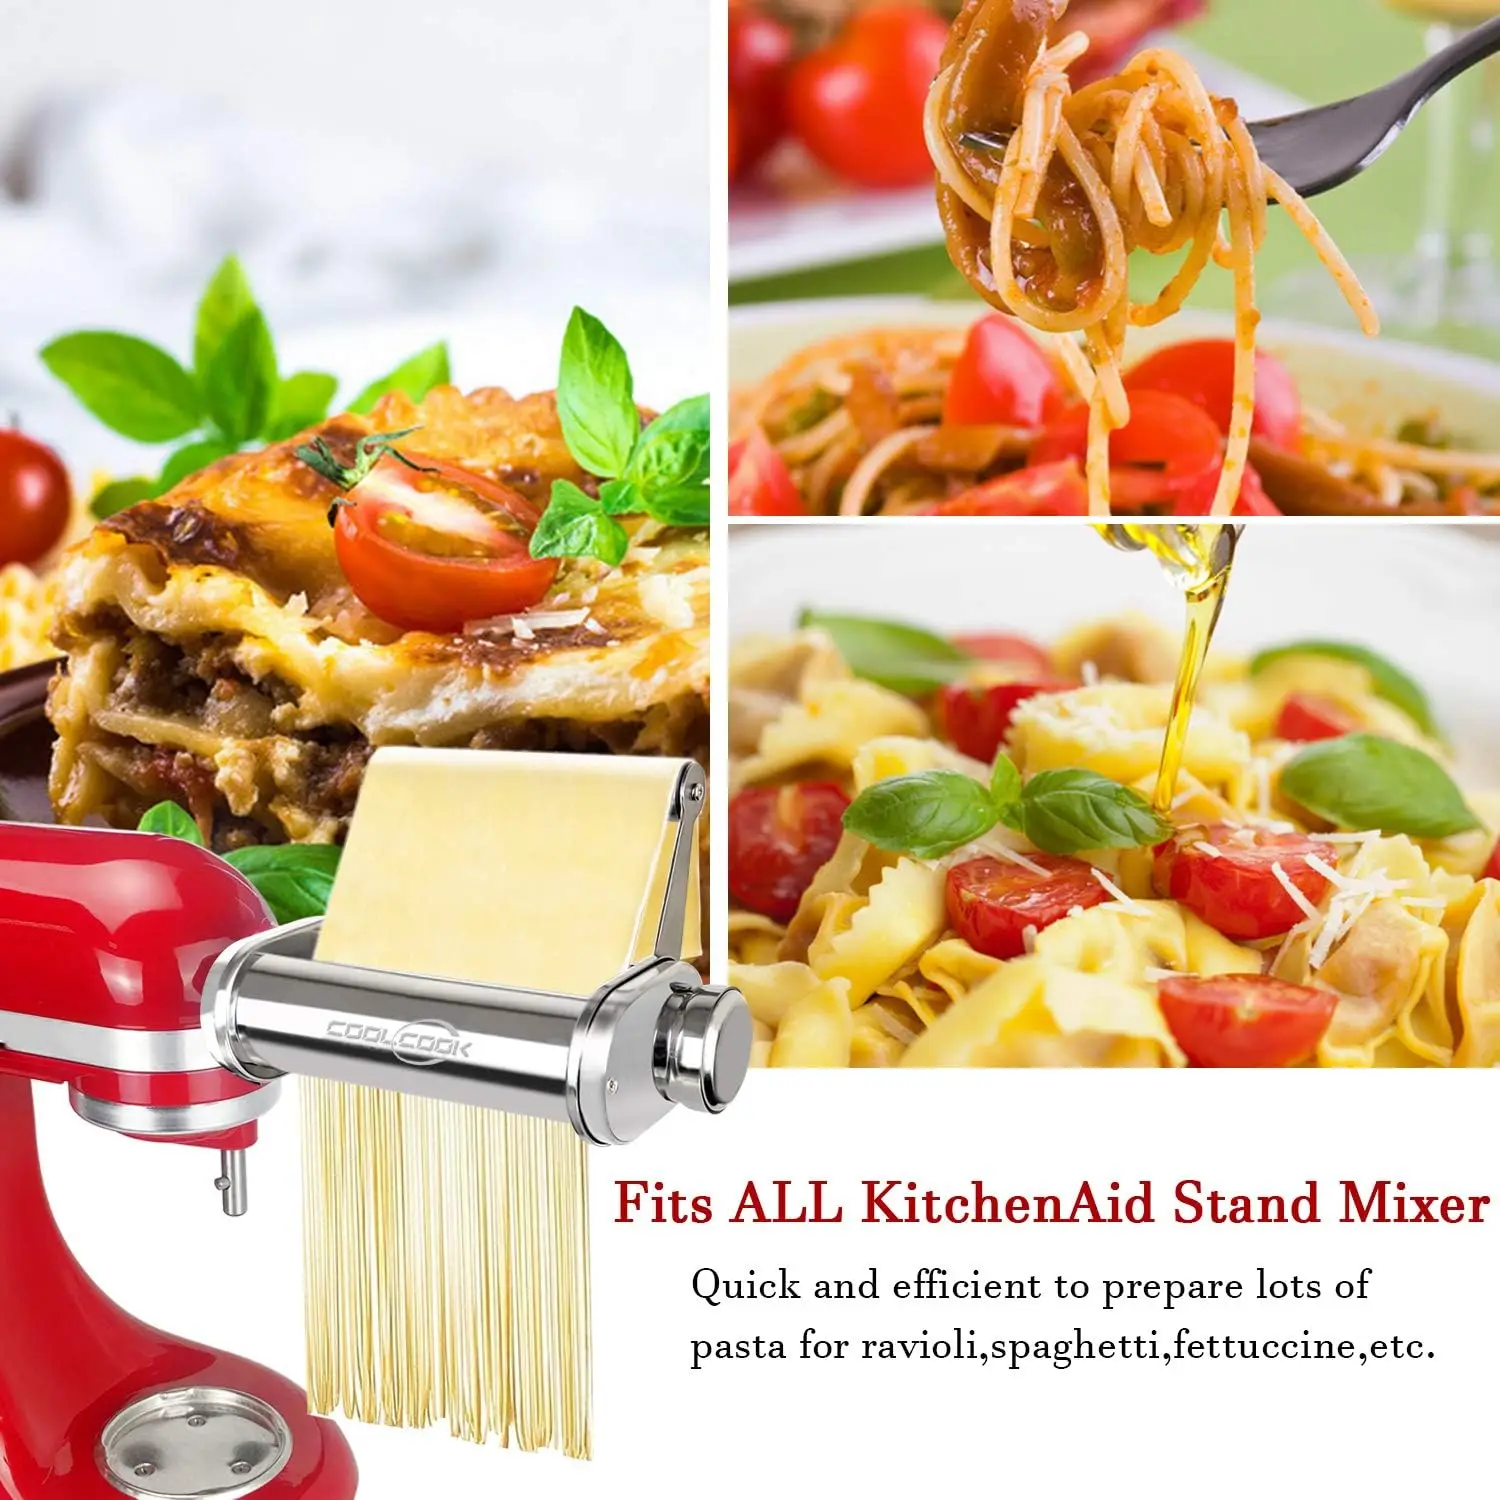 https://ae01.alicdn.com/kf/Sa9089e4d5a74457b8956c3ddea2b572dq/Pasta-Maker-Attachment-Set-for-KitchenAid-Stand-Mixer-with-Unique-Roller-Pasta-Sheet-Roller-Spaghetti-Cutter.jpg